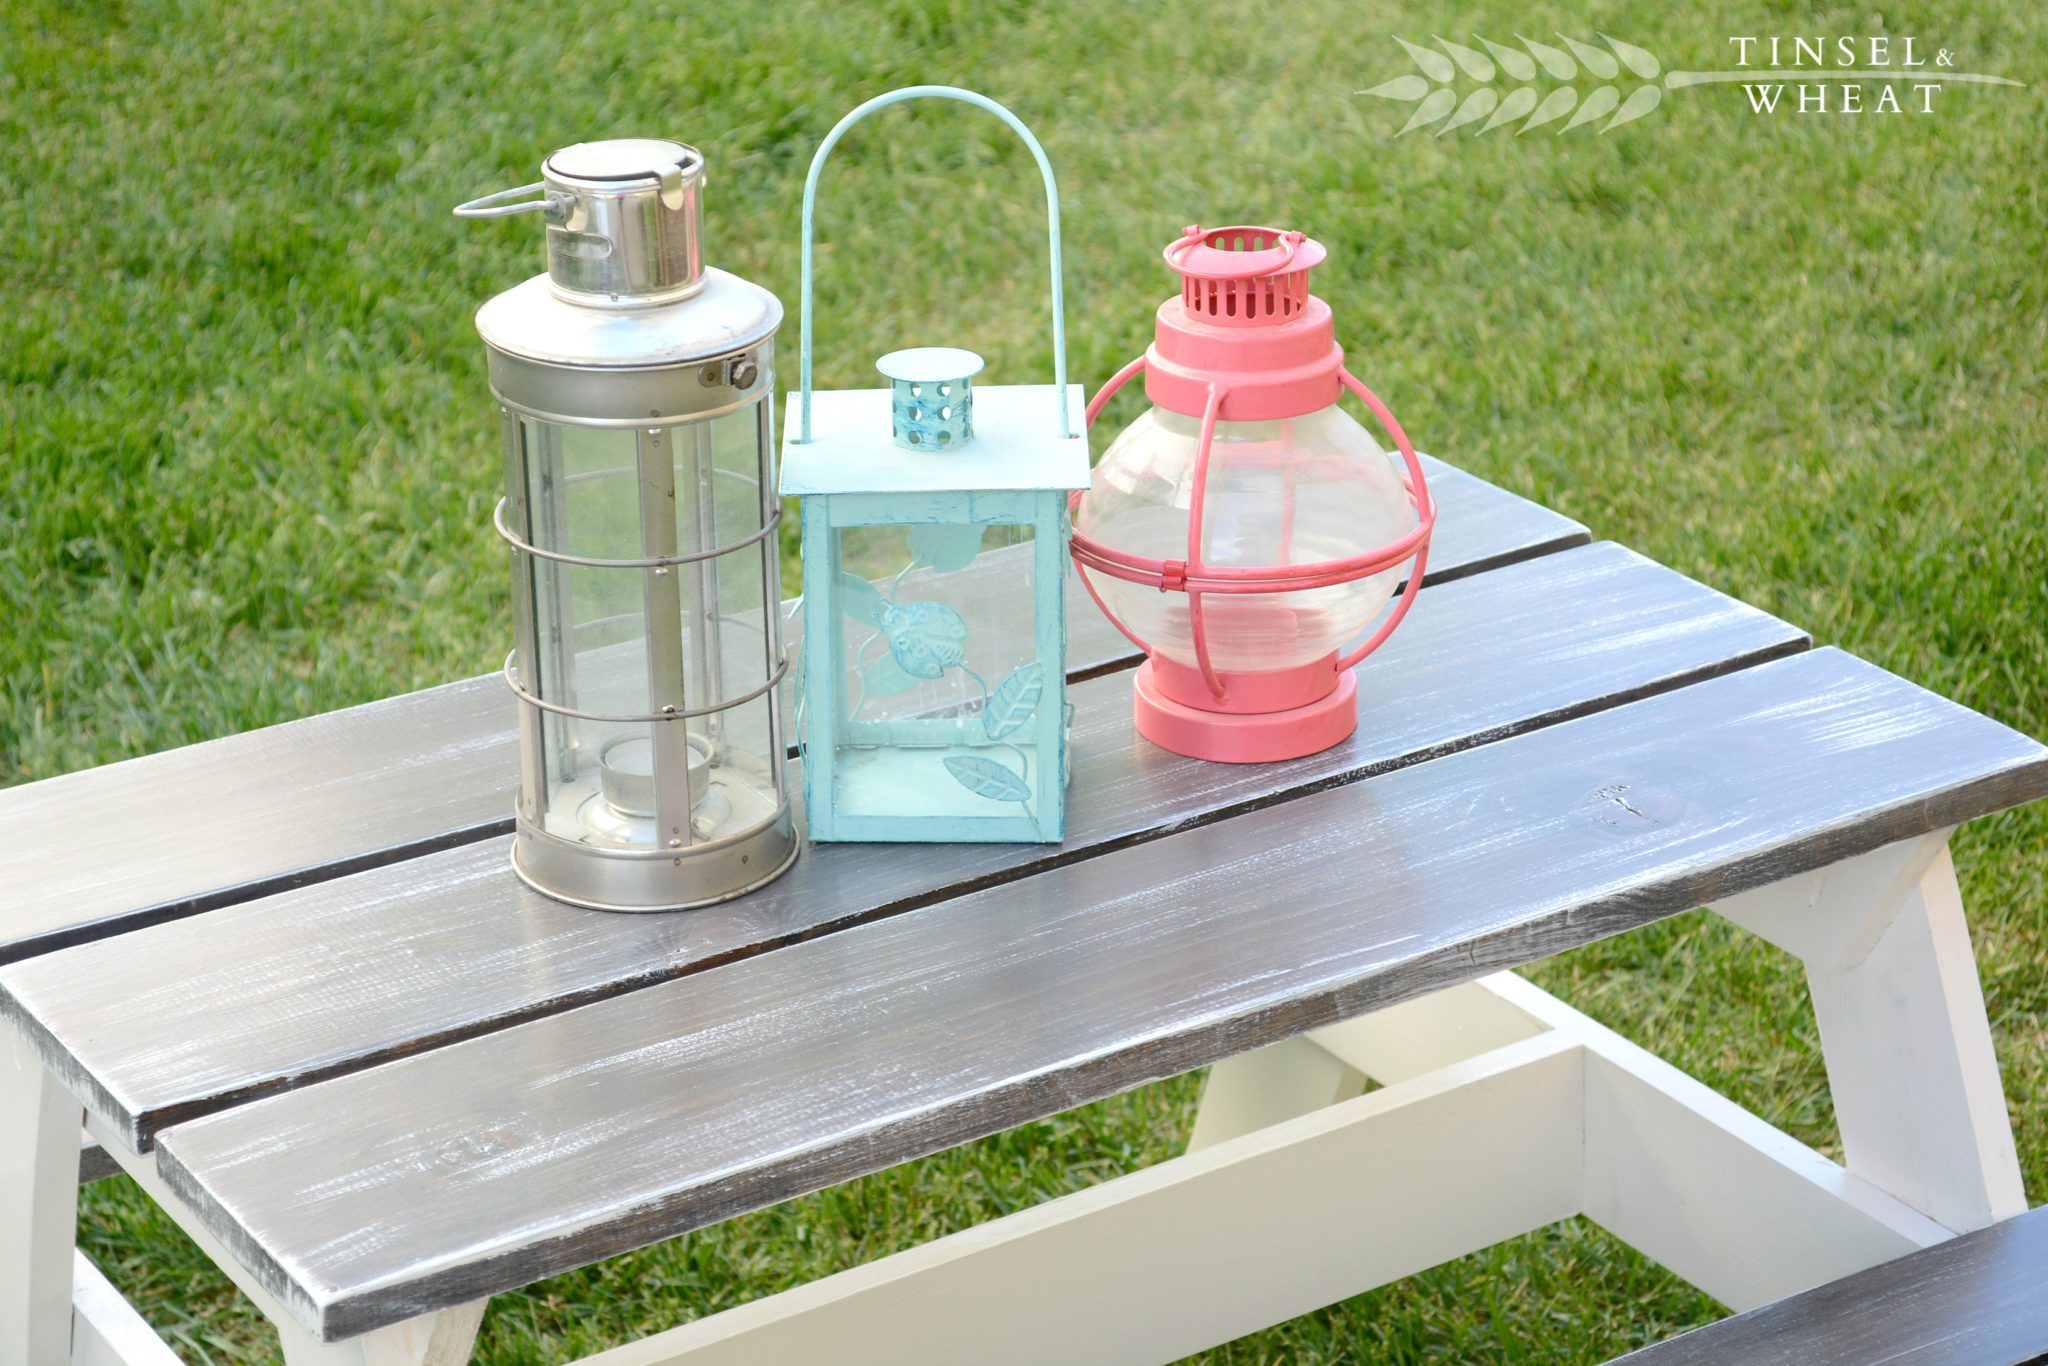 DIY Children's Picnic Table from Tinsel and Wheat